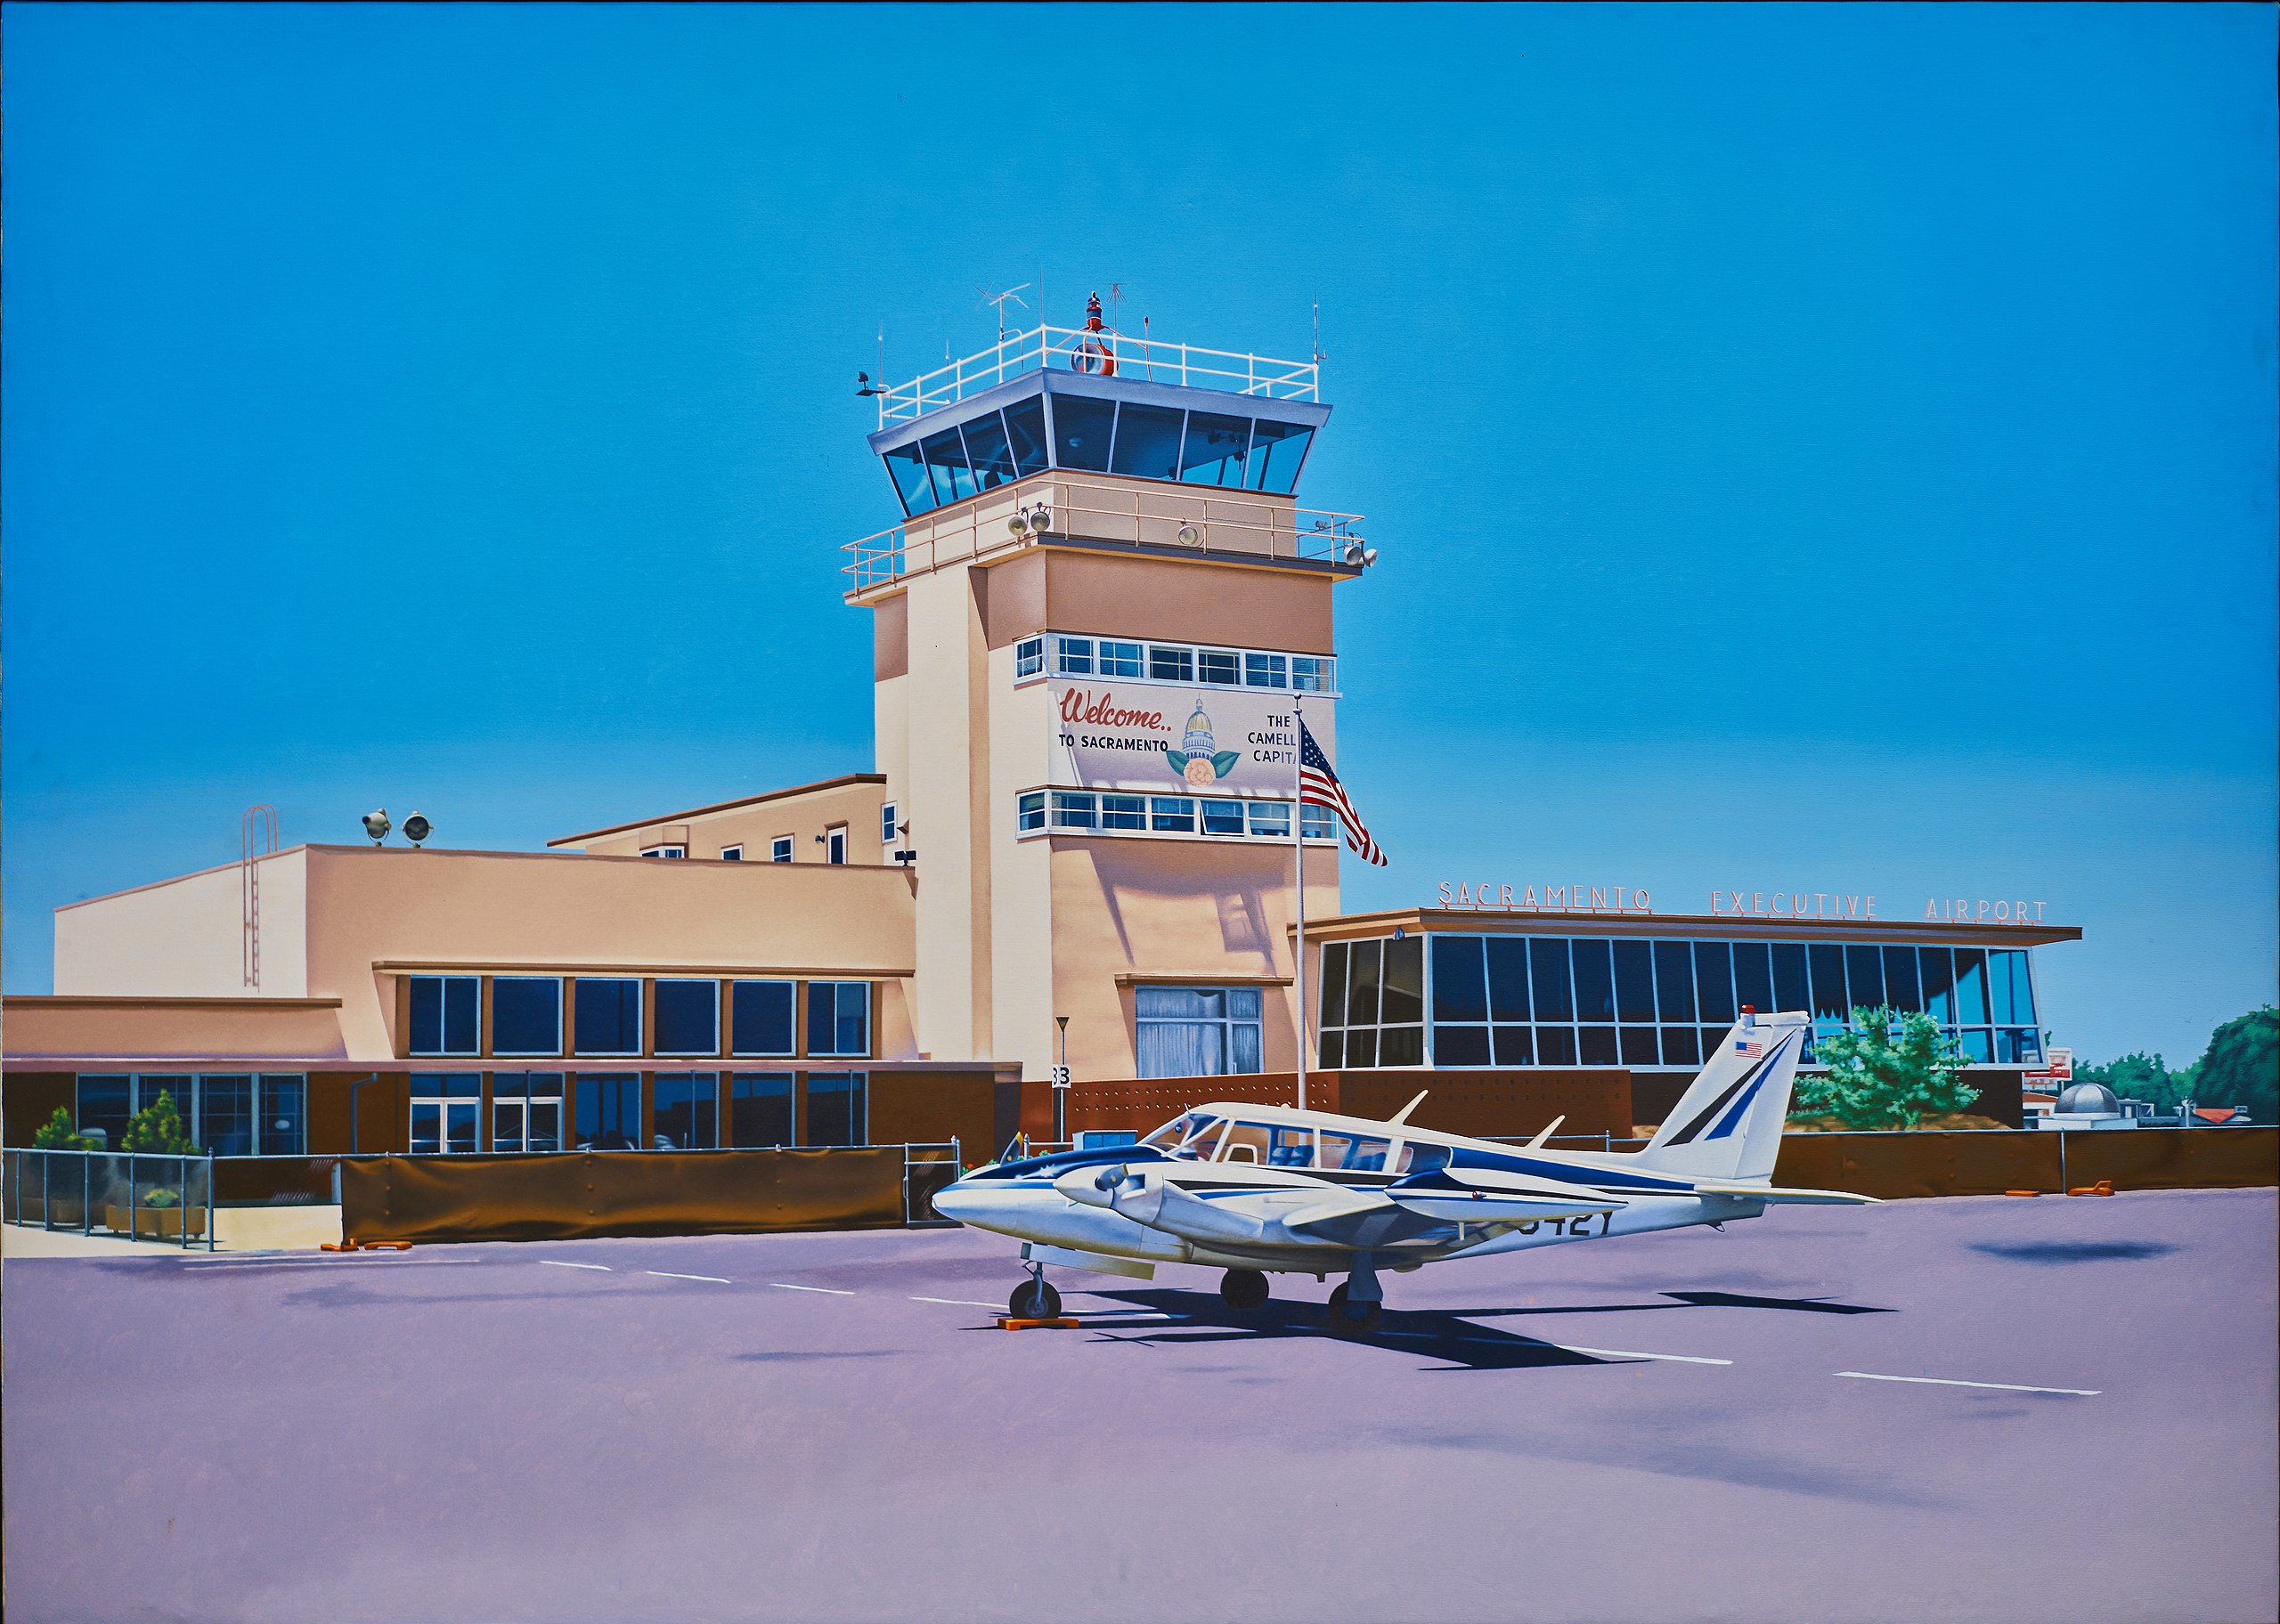 Illustration of someone airport in dream. This image is shown for those who are looking to understand the meaning of dreaming of an airport, be it the seeing, anticipating the airport, having to take a flight, missing a flight in the dream, or any sensations relating to an airport in a dream.